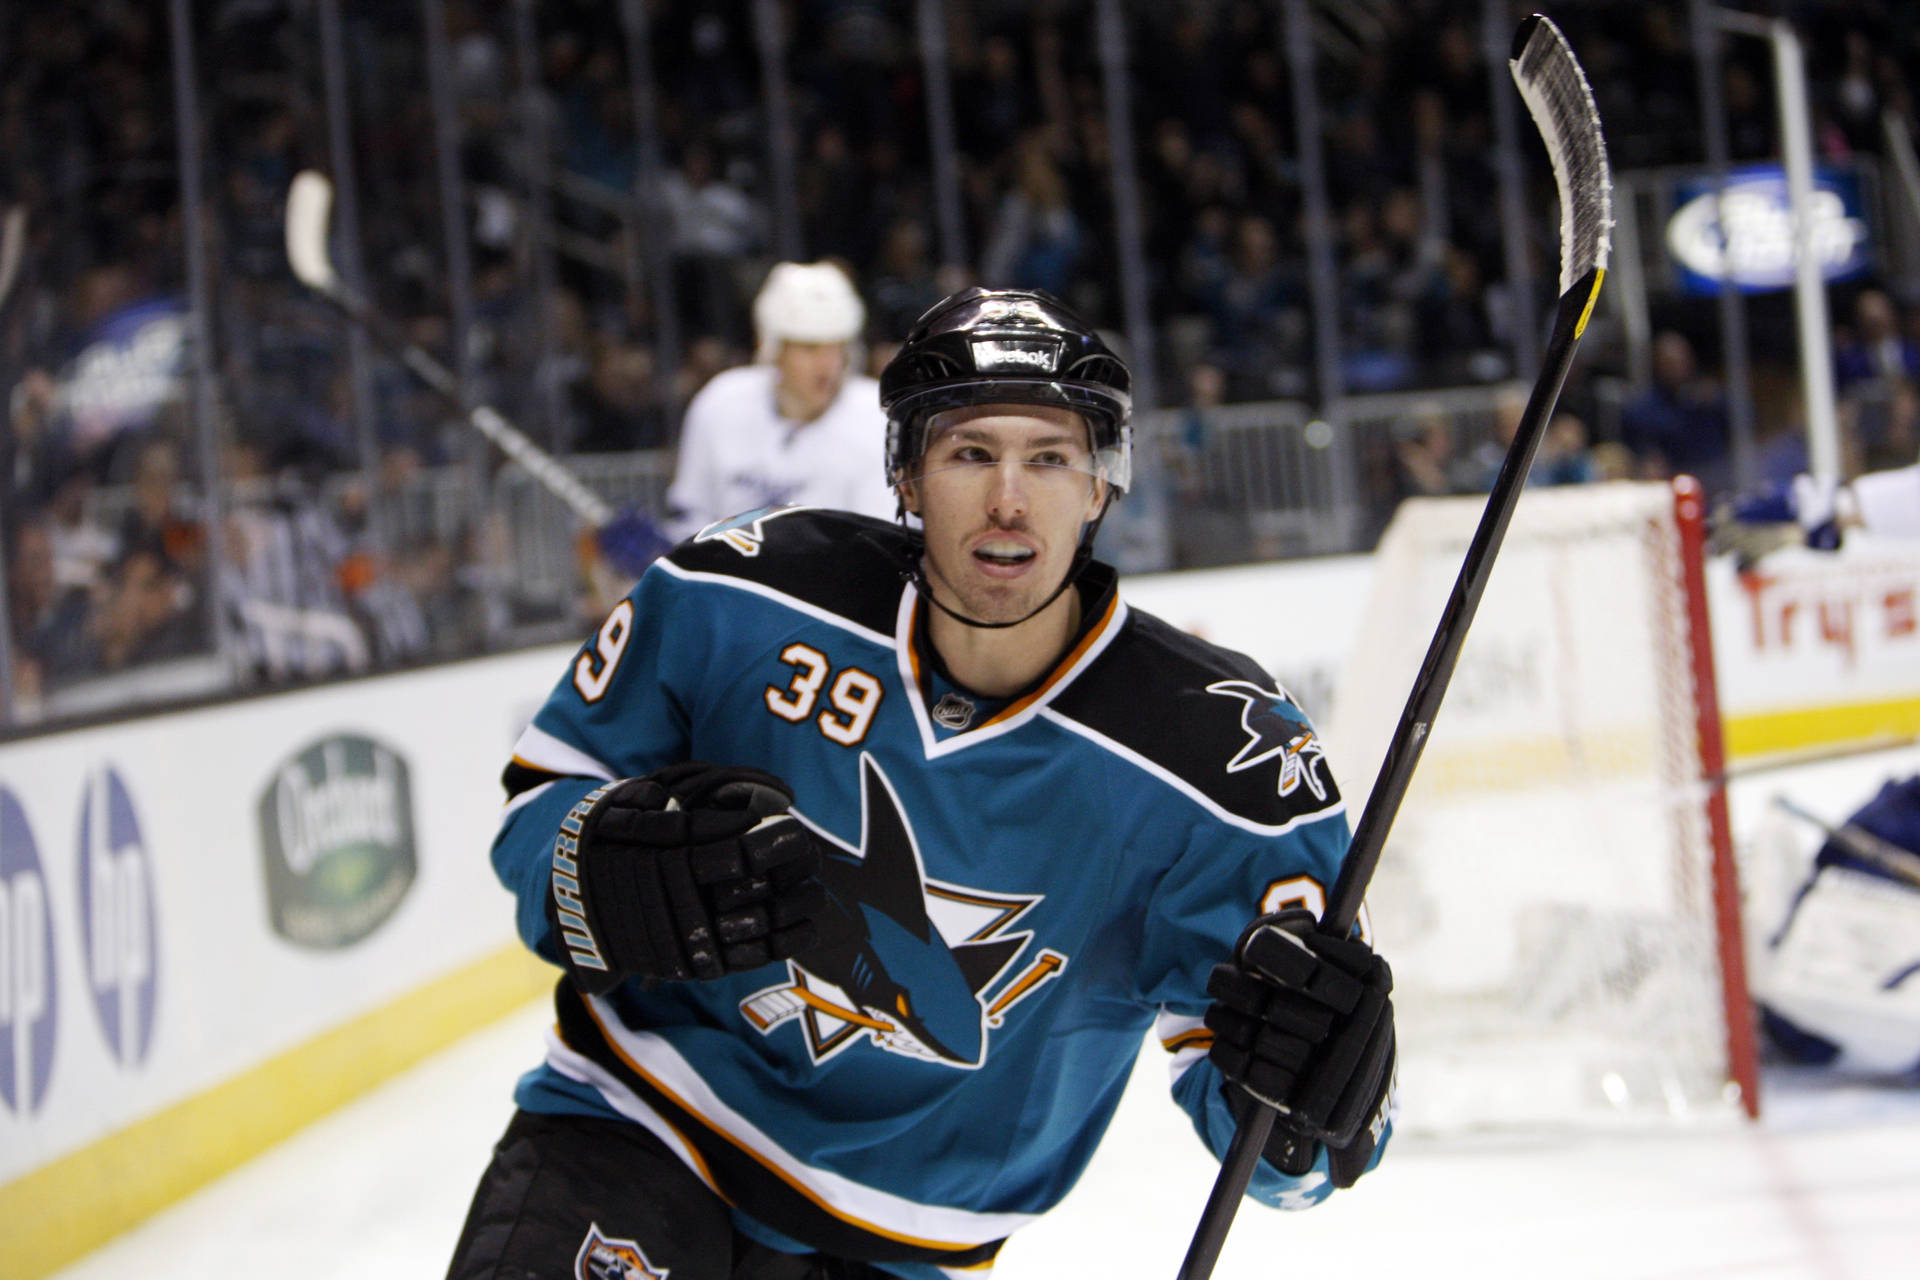 Professional Ice Hockey Center Logan Couture